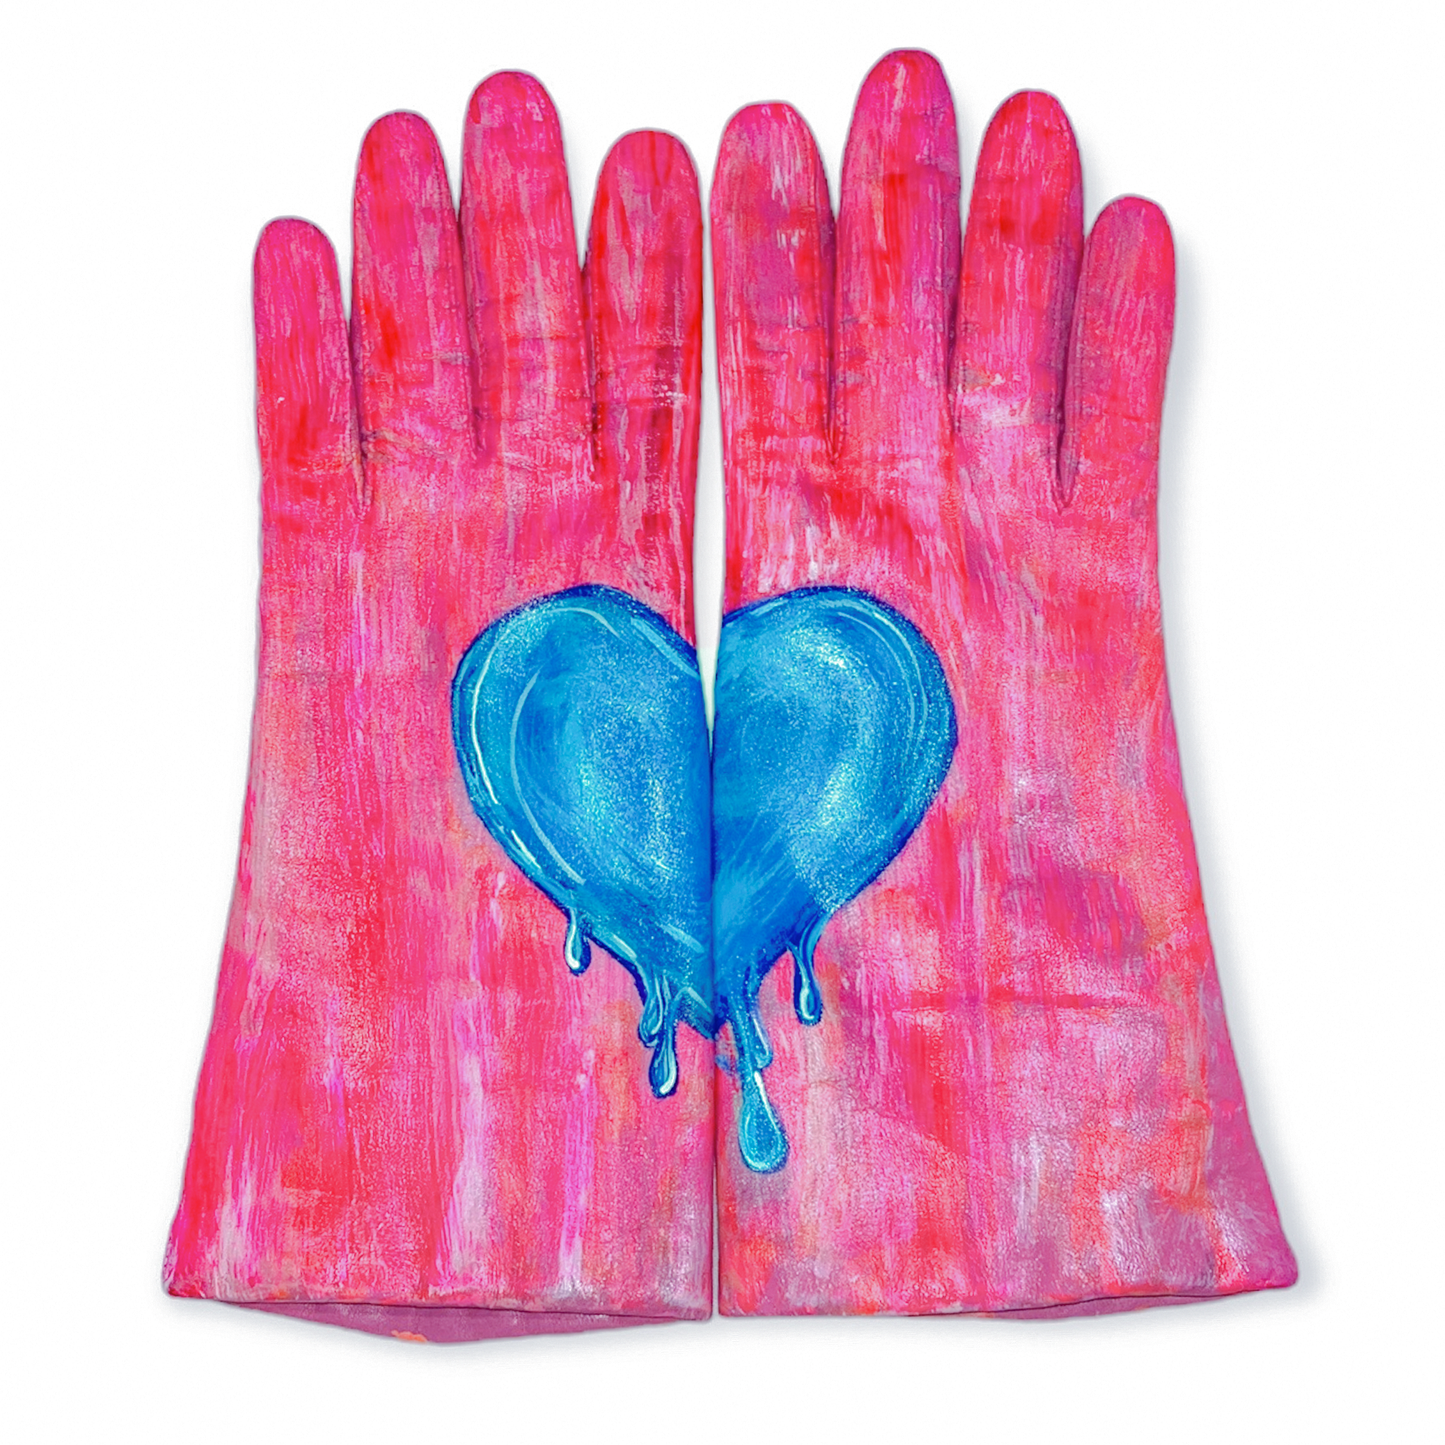 "Cold Hearted" - Up-cycled Leather Gloves - Hand Painted by Skye De La Rosa